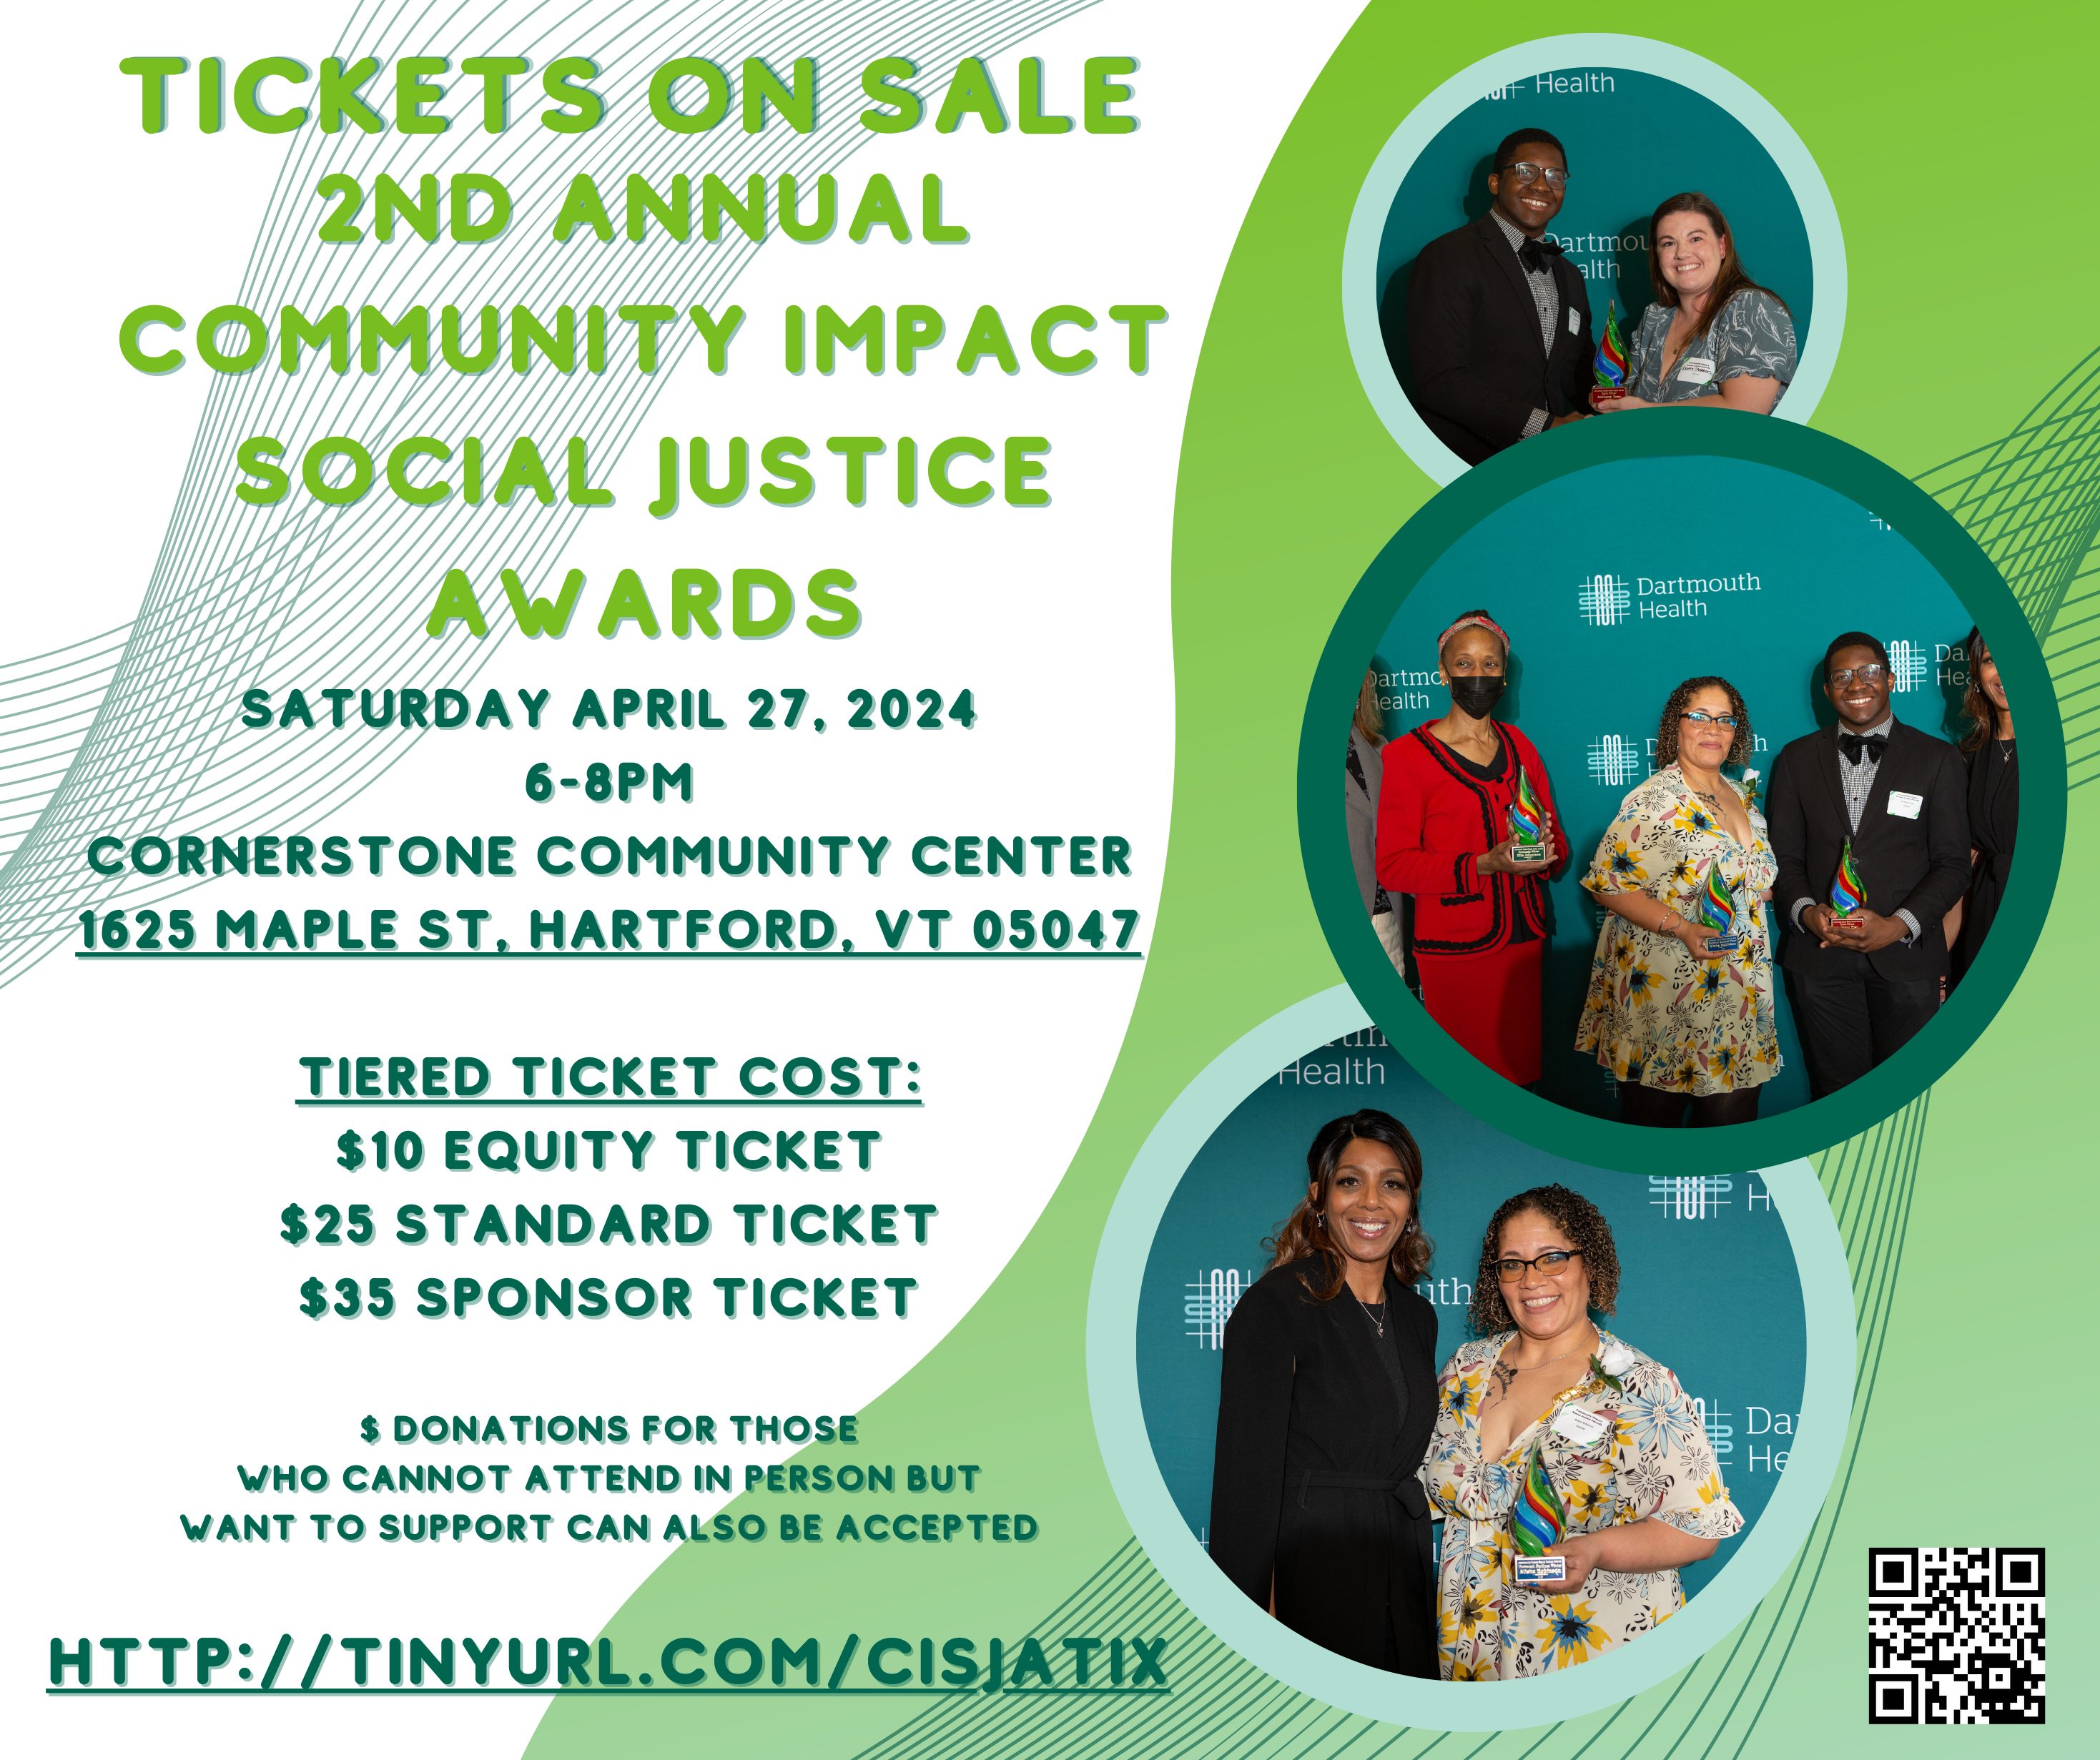 Community Impact Social Justice Awards Tickets